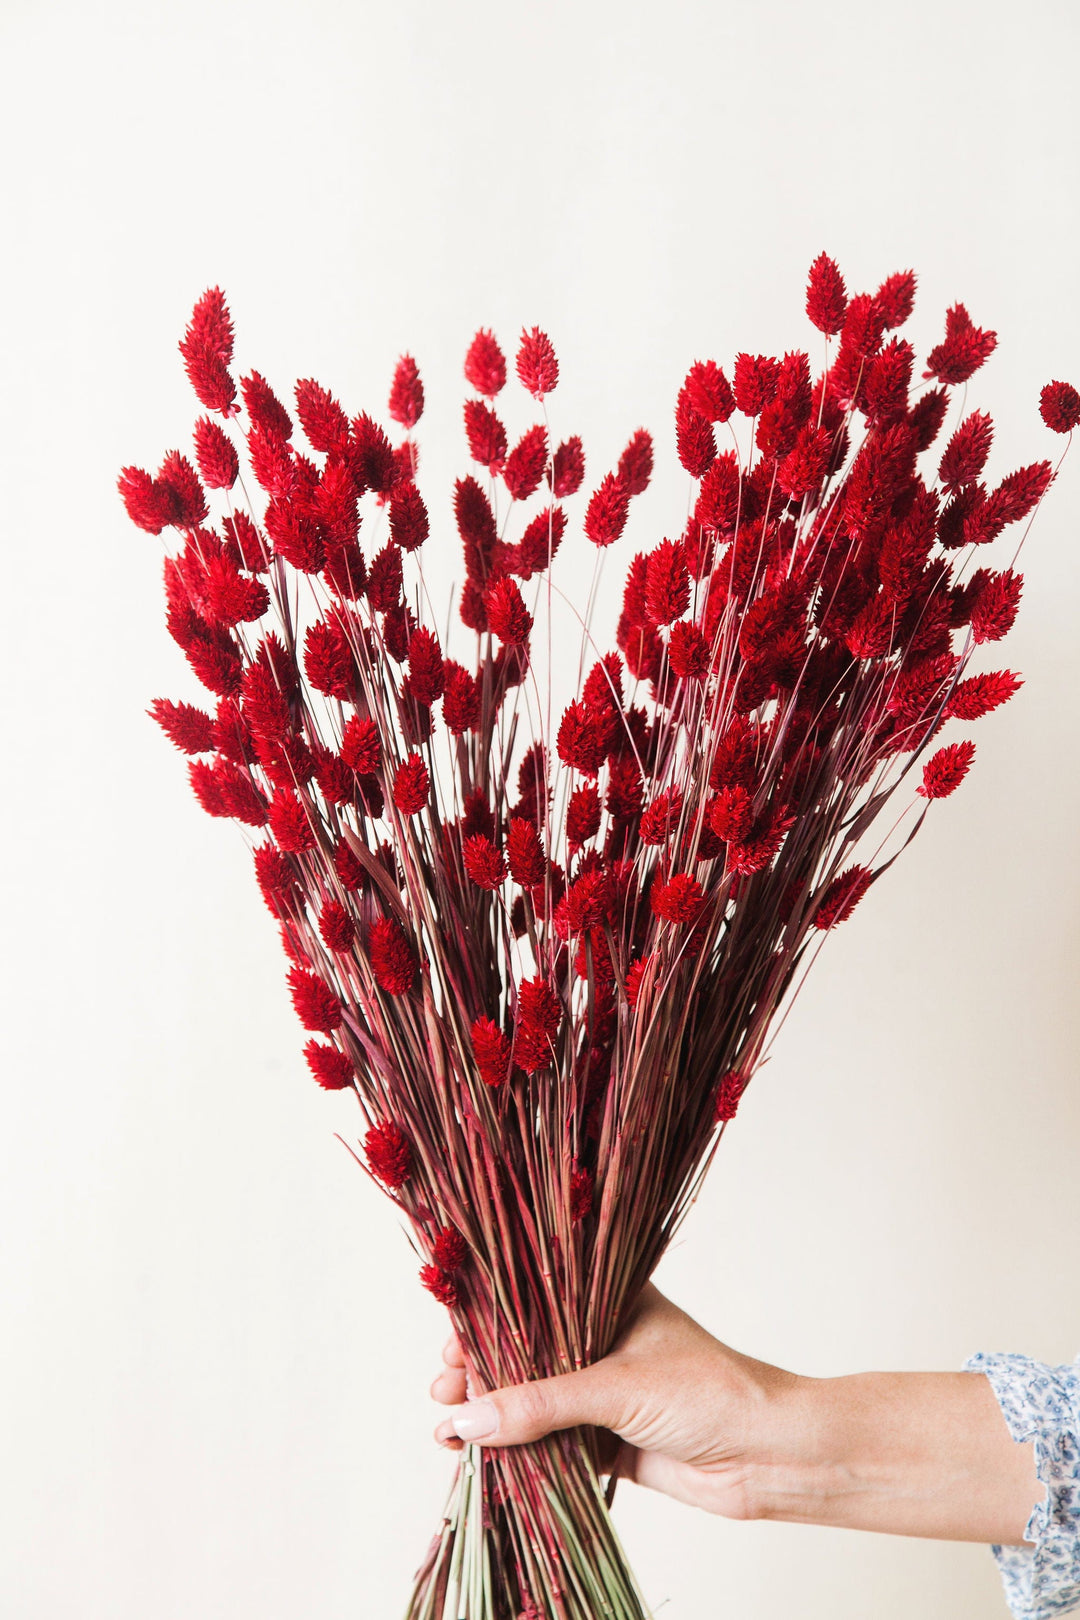 Idlewild Floral Co. Bunches Red Phalaris